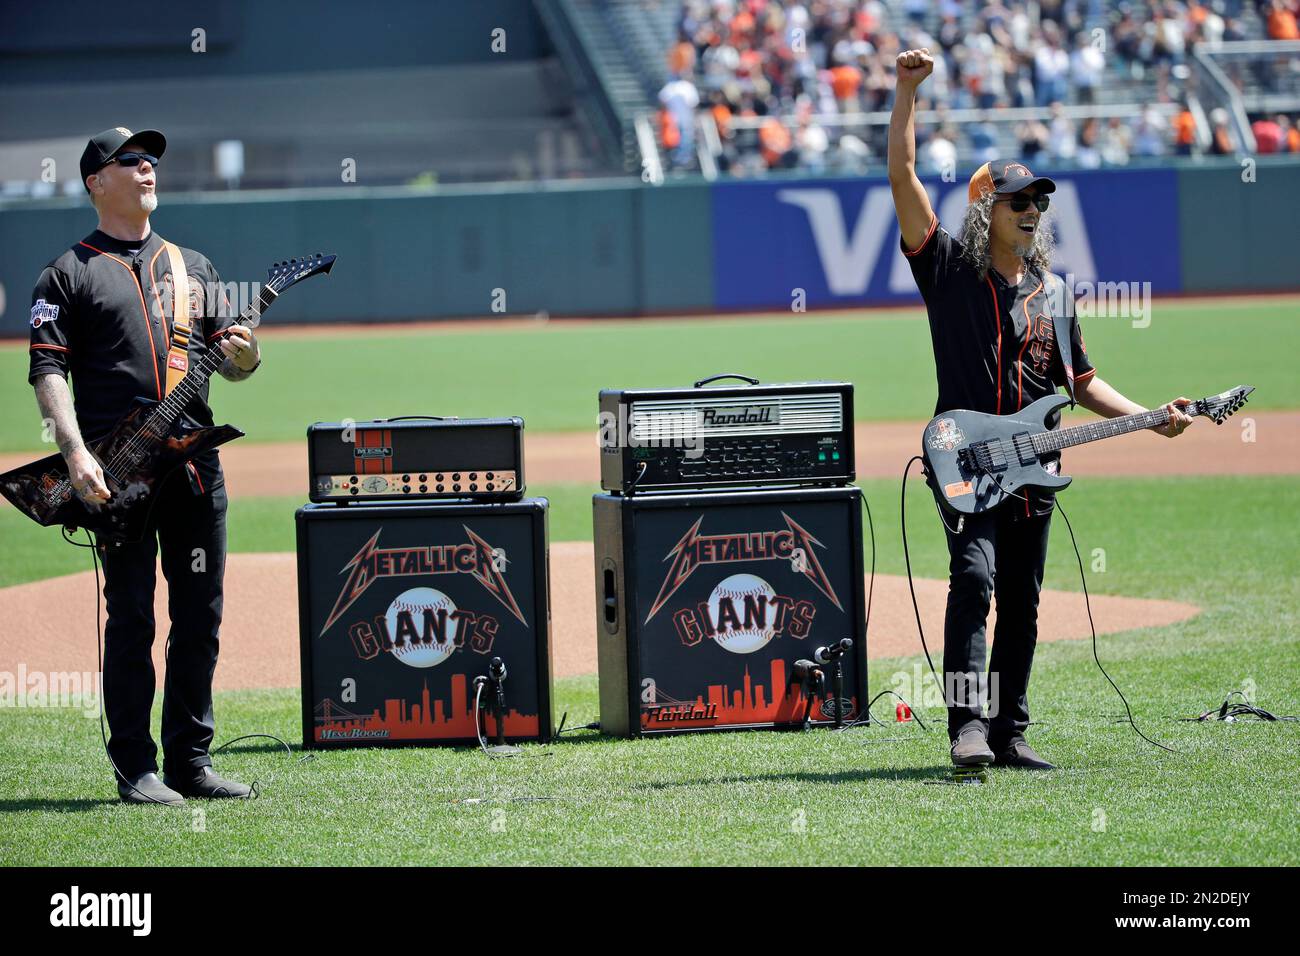 Metallica lead singer James Hetfield, left, salutes the crowd alongside  guitarist Kirk Hammett after playing he national anthem before a baseball  game between the San Francisco Giants and Los Angeles Angels on